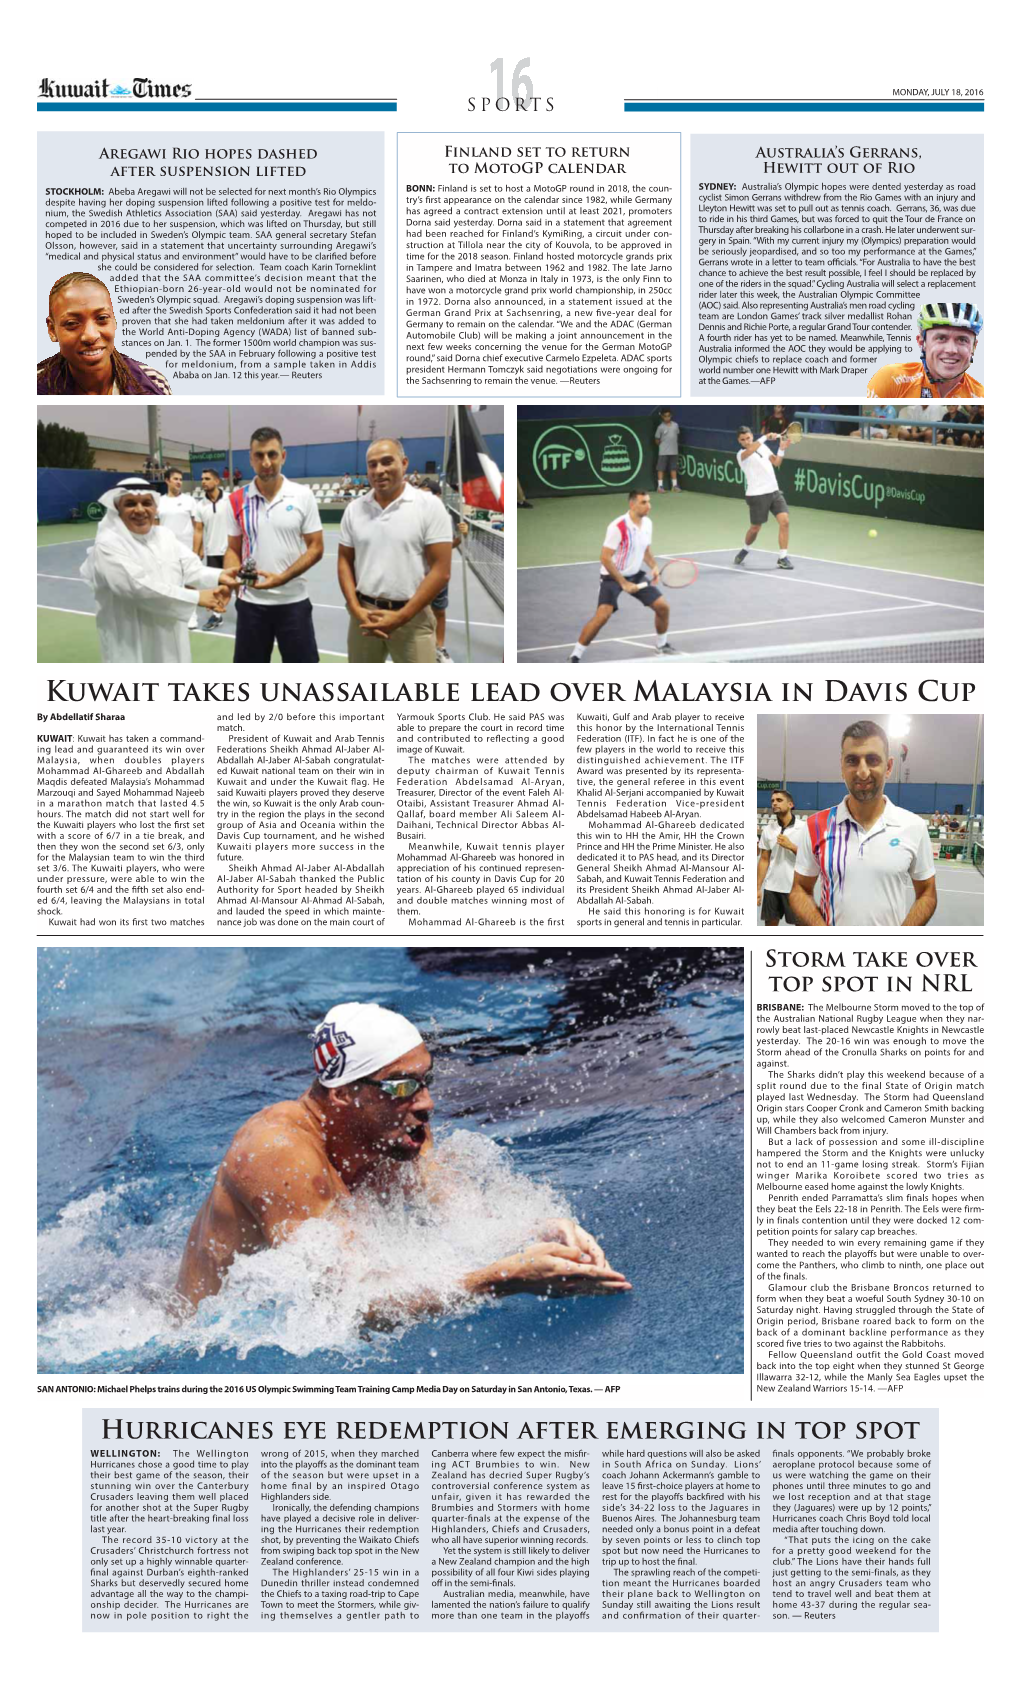 Kuwait Takes Unassailable Lead Over Malaysia in Davis Cup